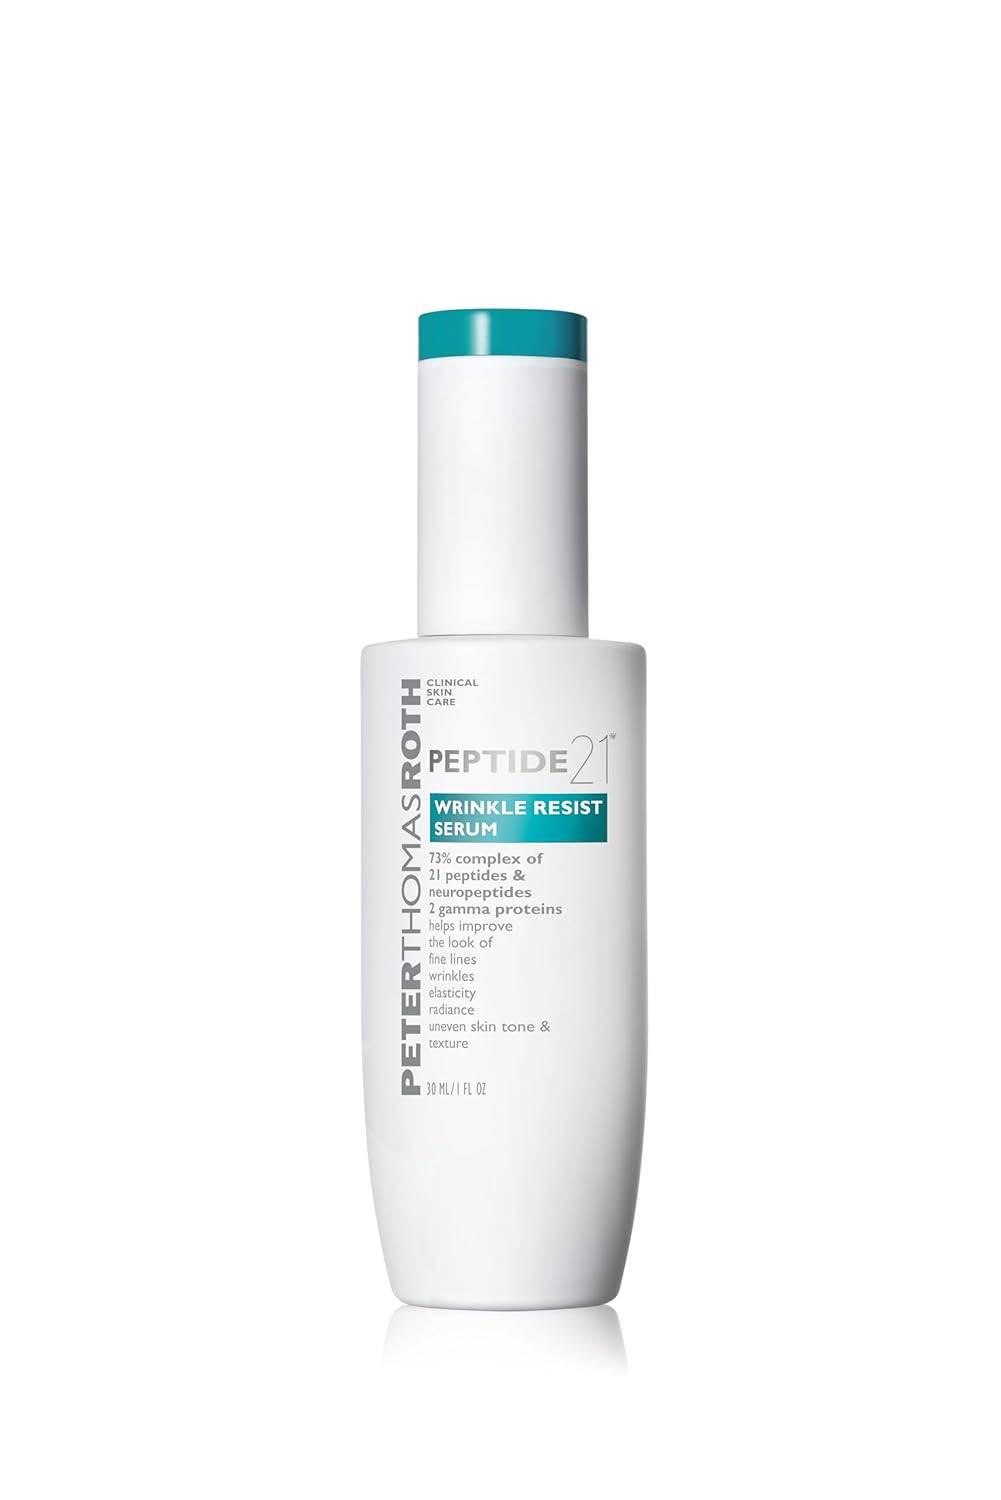 Peptide 21 Wrinkle Resist Serum | Peptides and Neuropeptides Improve the Look of Fine Lines, Wrinkles, Elasticity, Radiance, Uneven Skin Tone and Texture